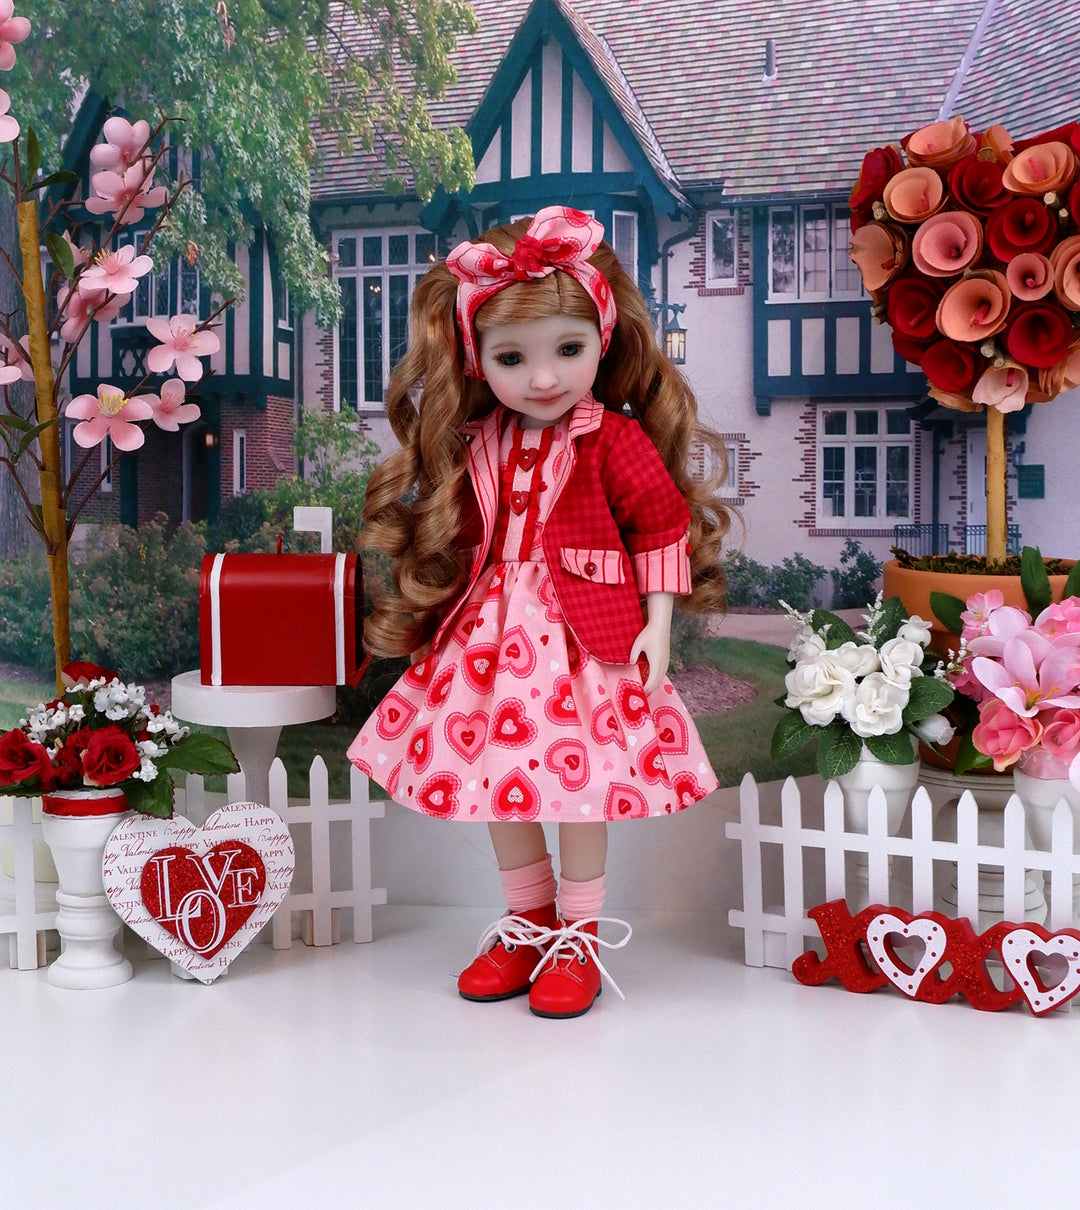 Making Valentines - dress and blazer with boots for Ruby Red Fashion Friends doll